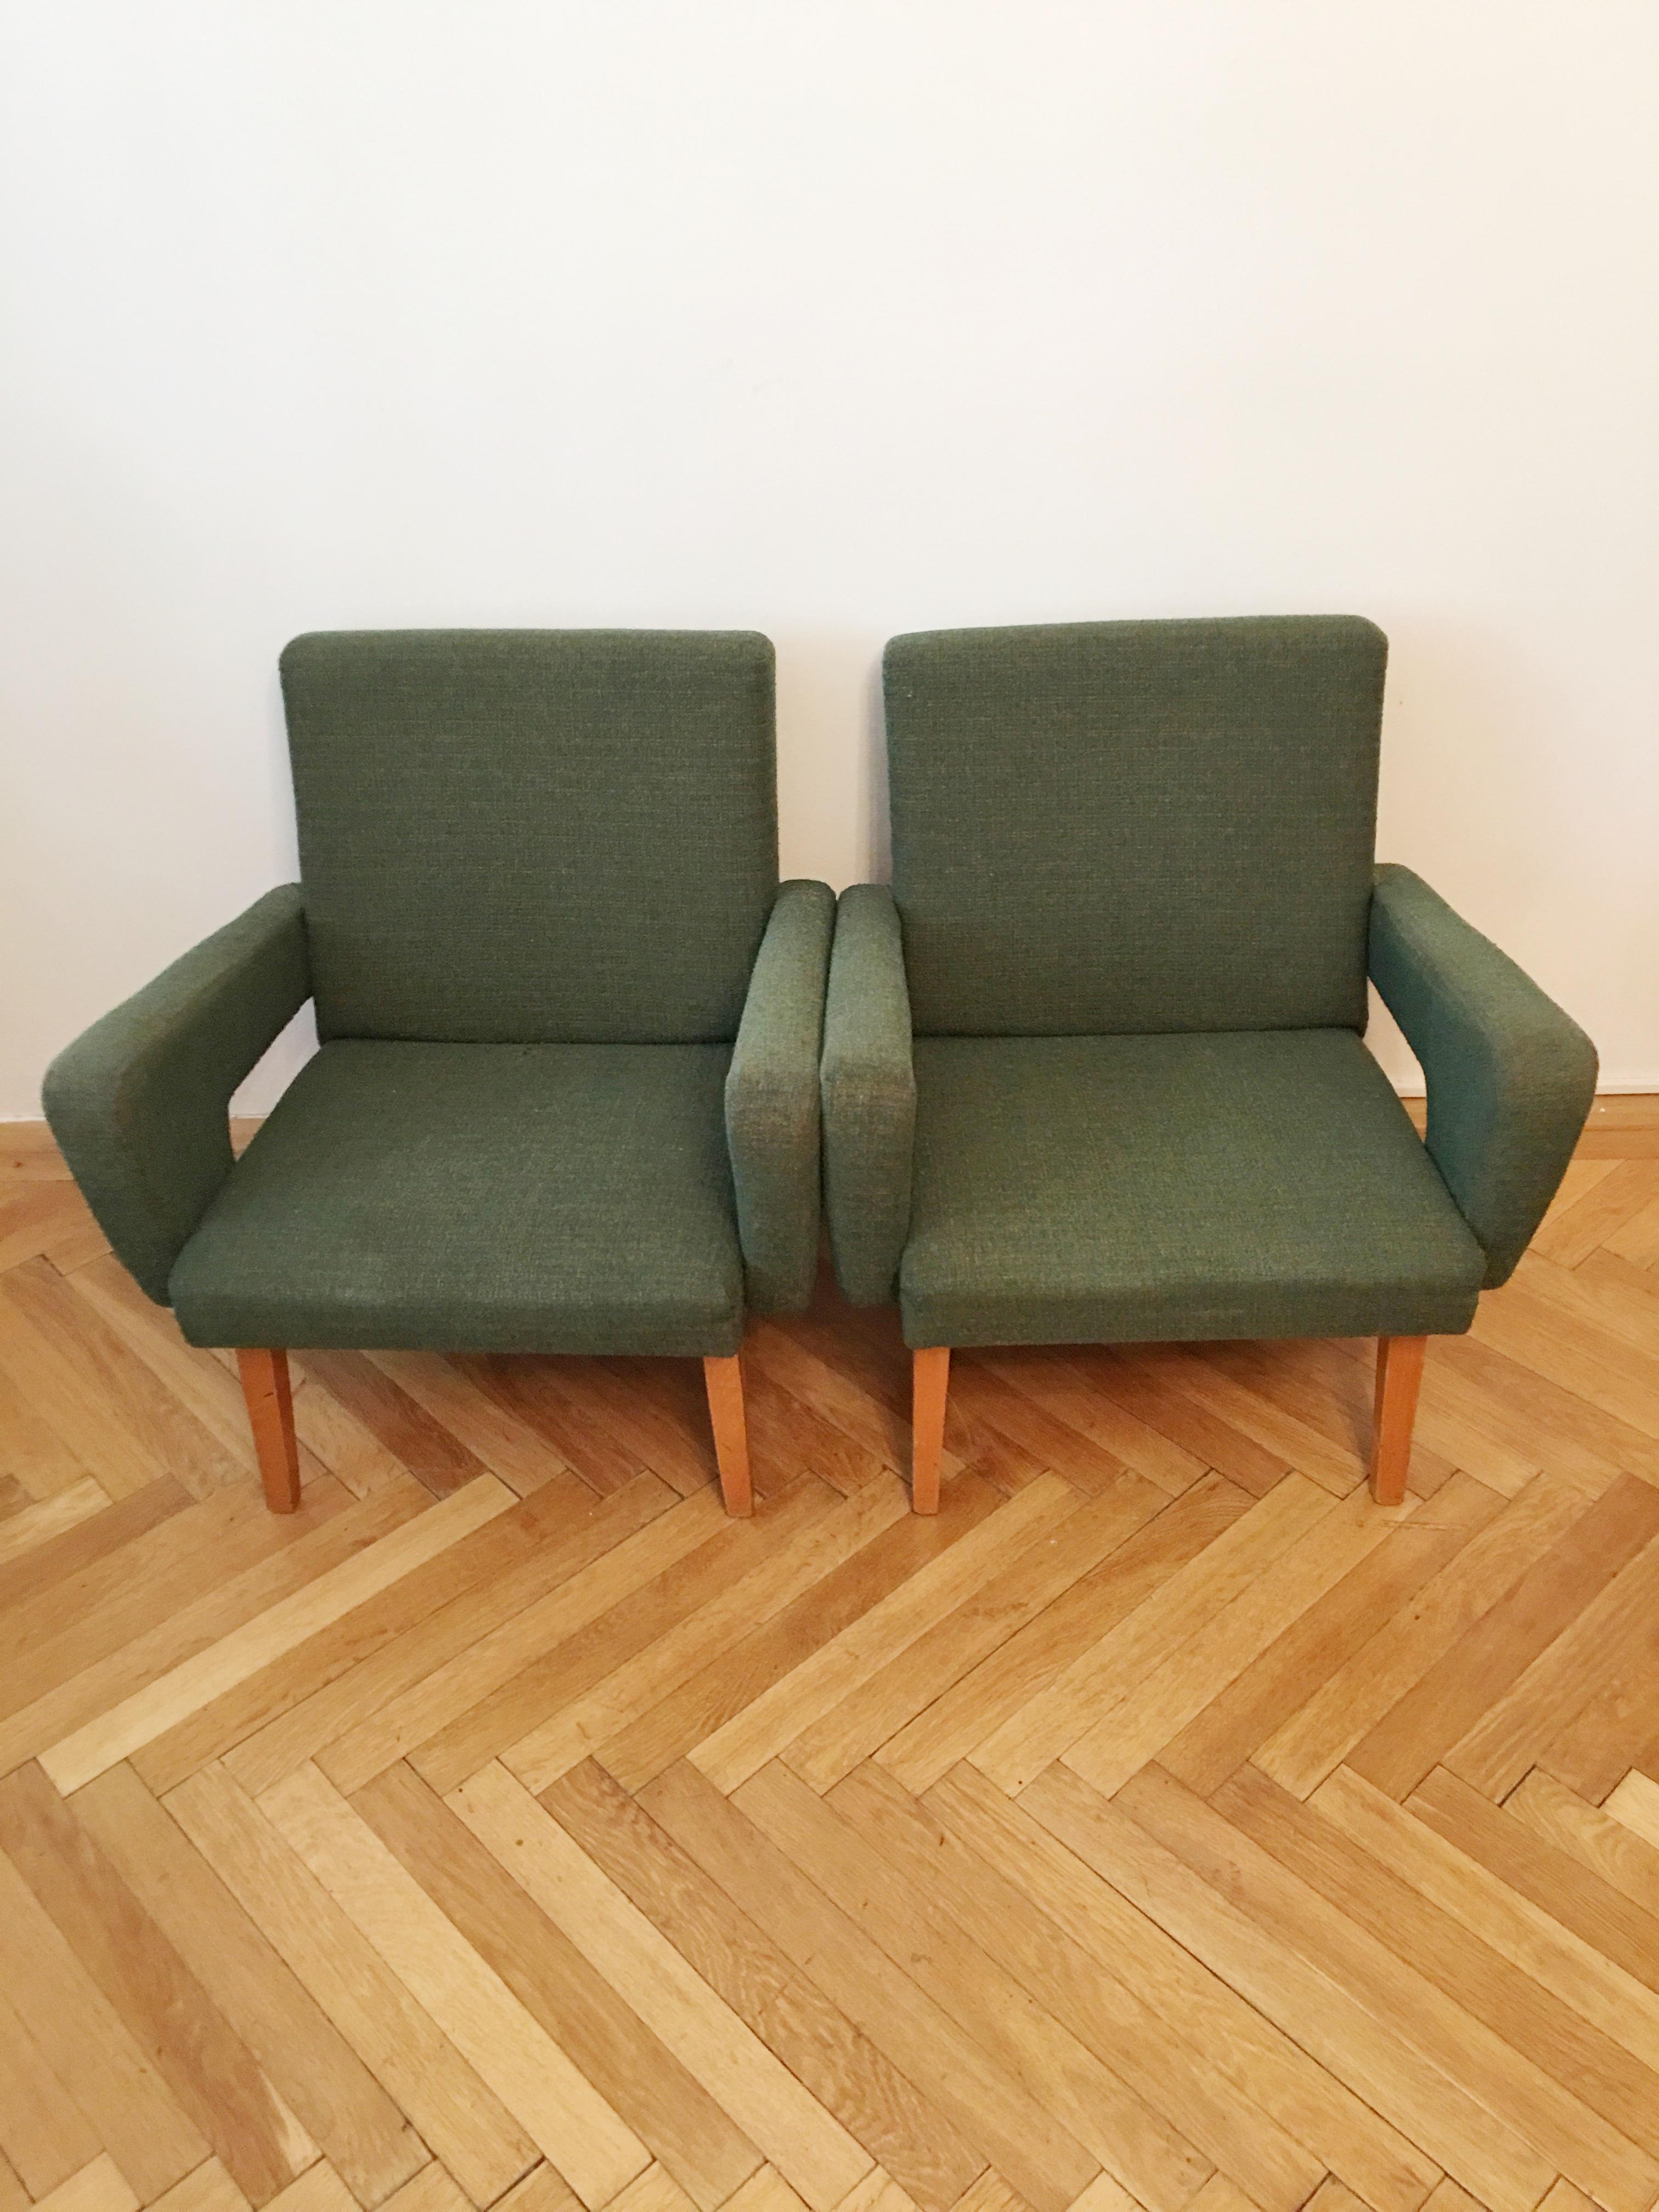 Mid-Century Modern Green Vintage Rocket Armchairs by Jitona, 1960s, Pair For Sale